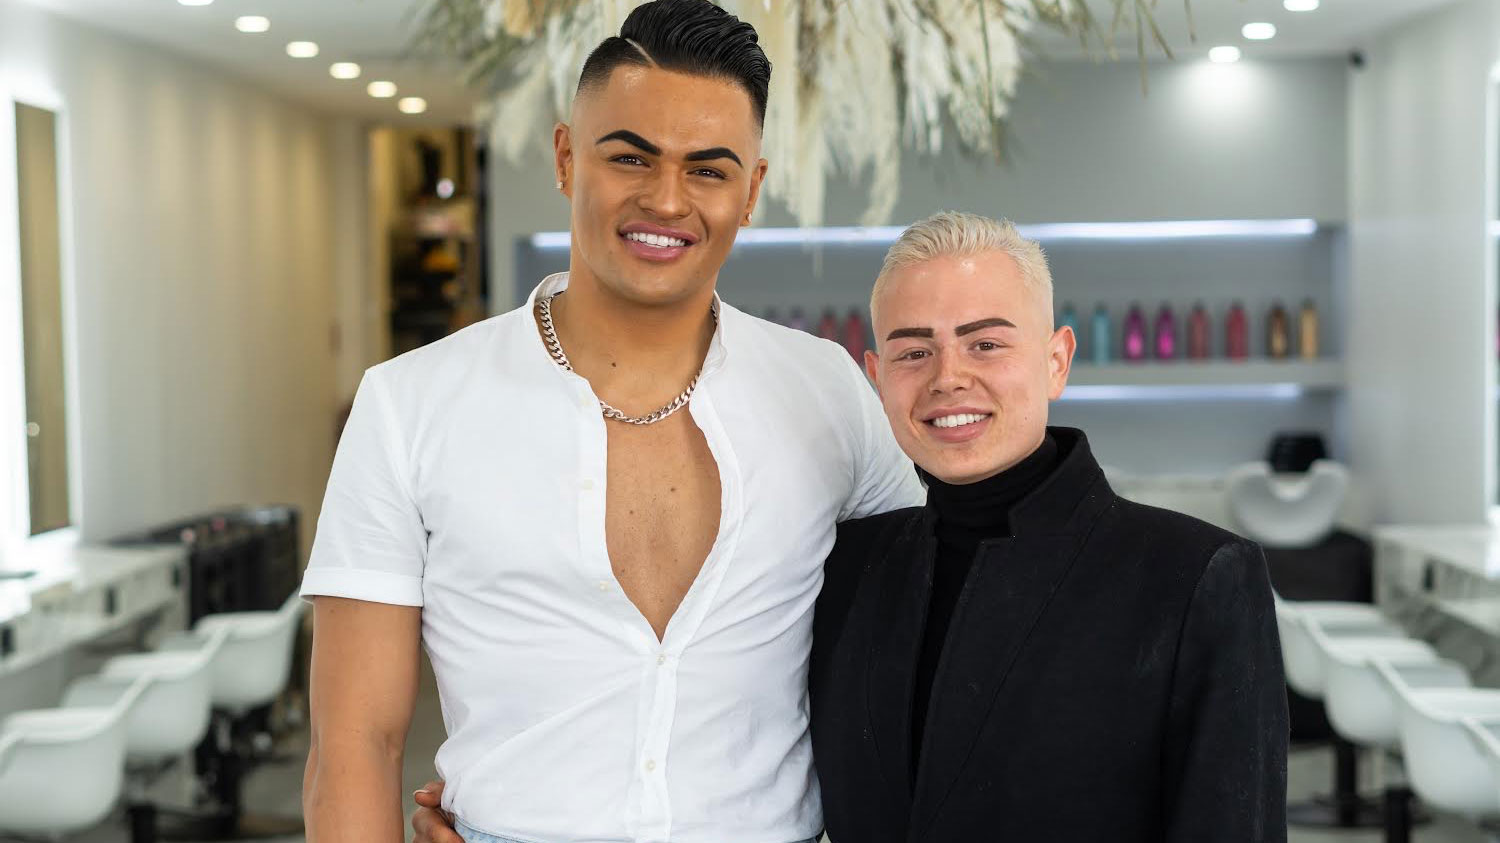 Ayden Hawkins-Keen and Kaine Vakai, from Kaine Vakai Hair Artistry, say the planned client limit of five is not sustainable.